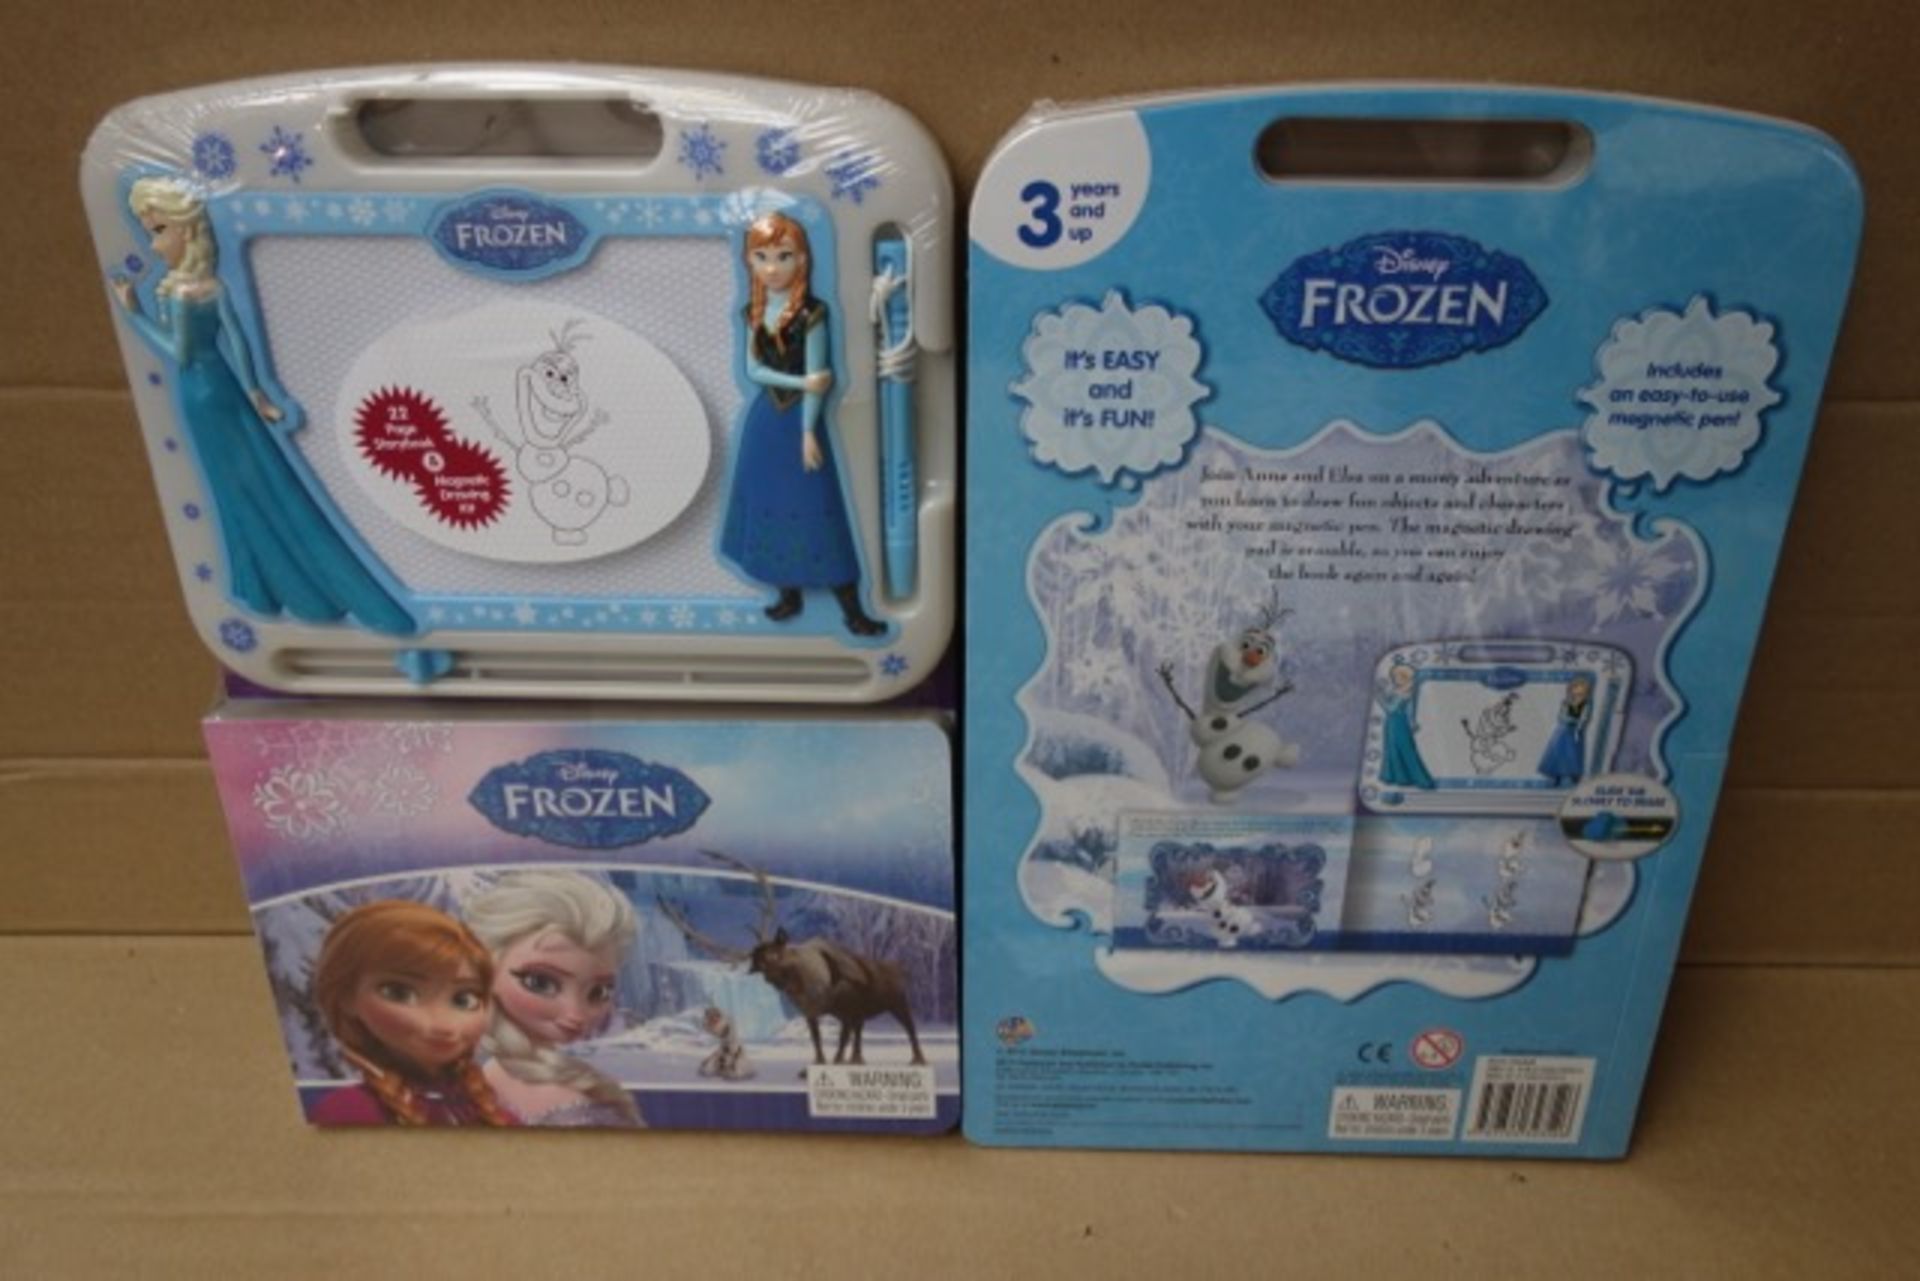 60 x Disney Frozen Storybook & Magnetic Drawing Kit's. It's easy and it's fun! Easy to use mess free